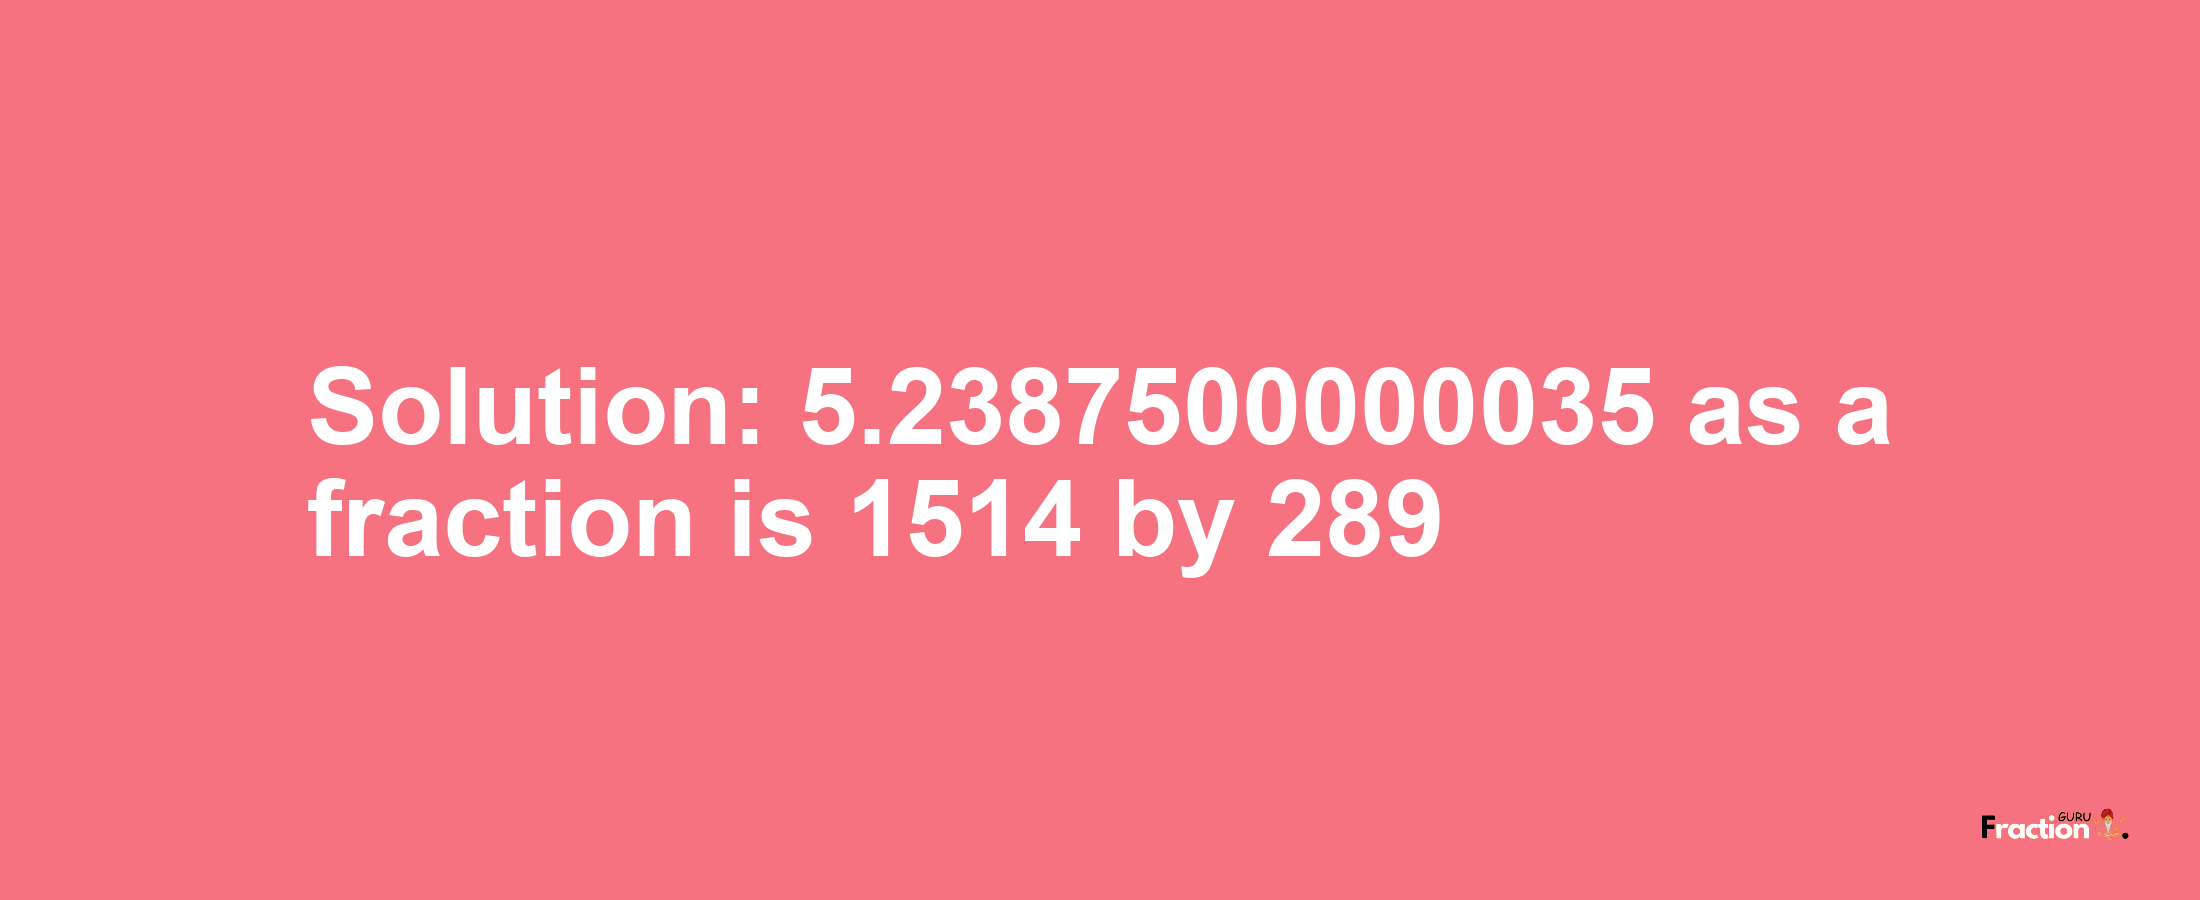 Solution:5.2387500000035 as a fraction is 1514/289